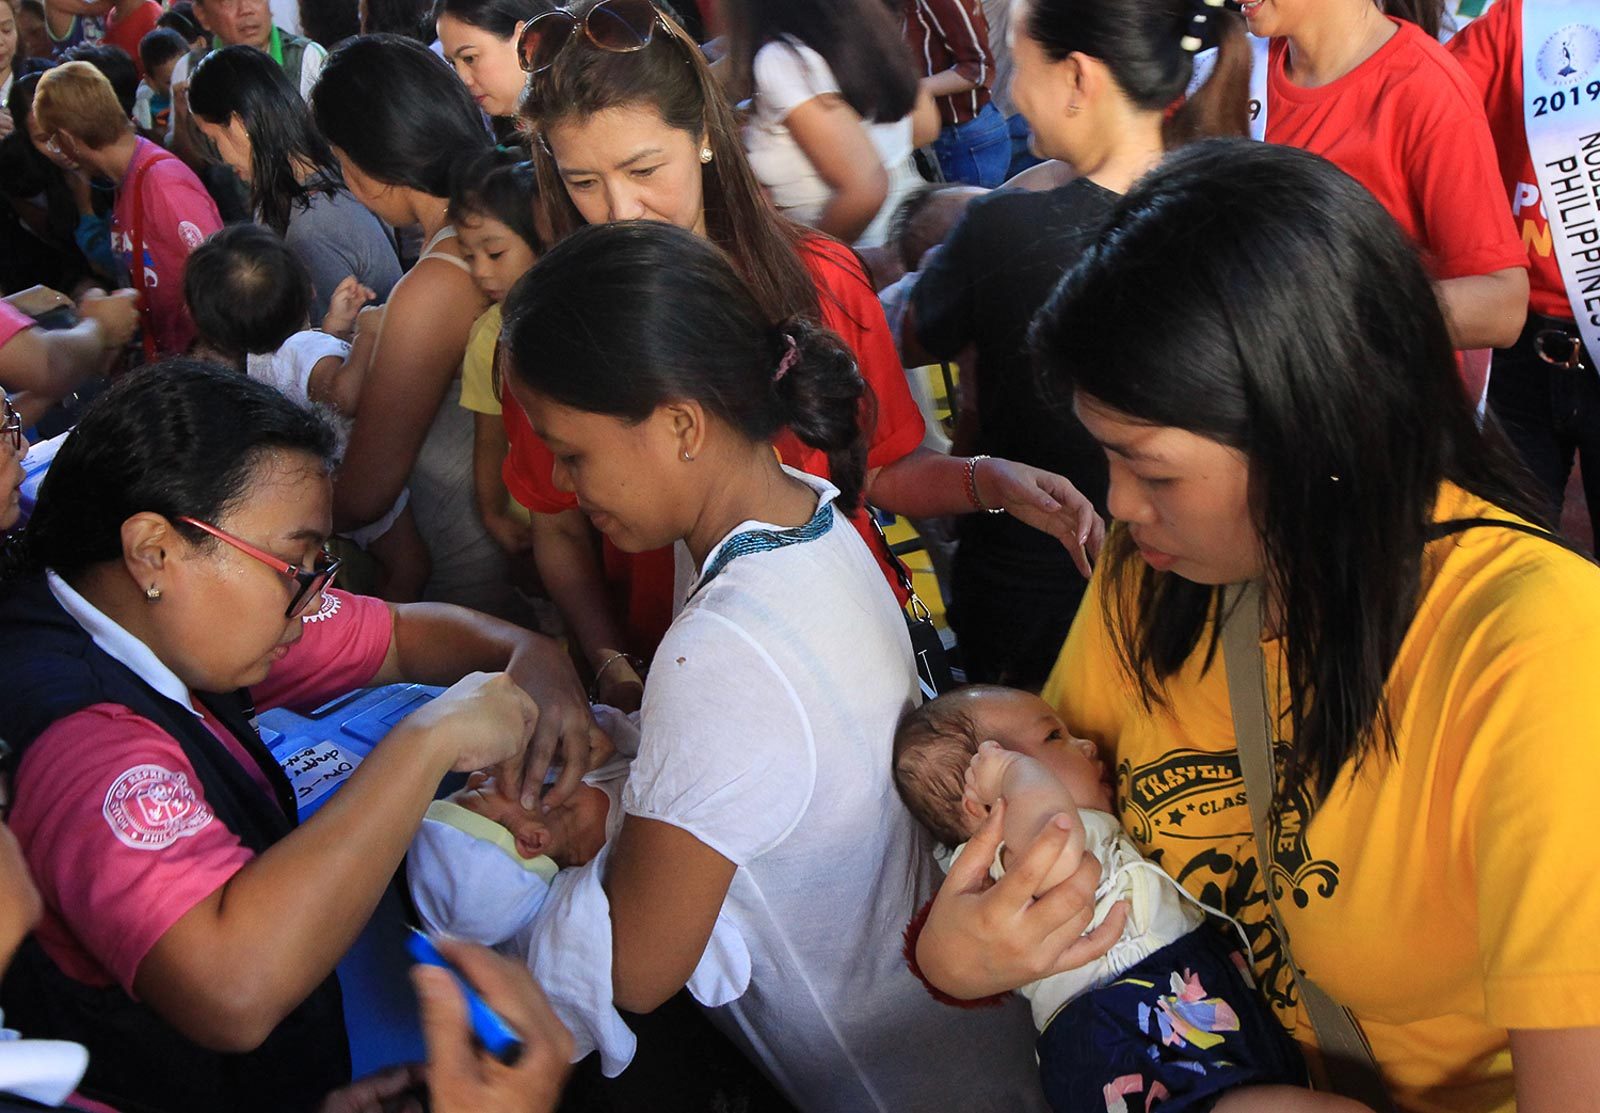 DOH confirms 4 more cases of polio in PH